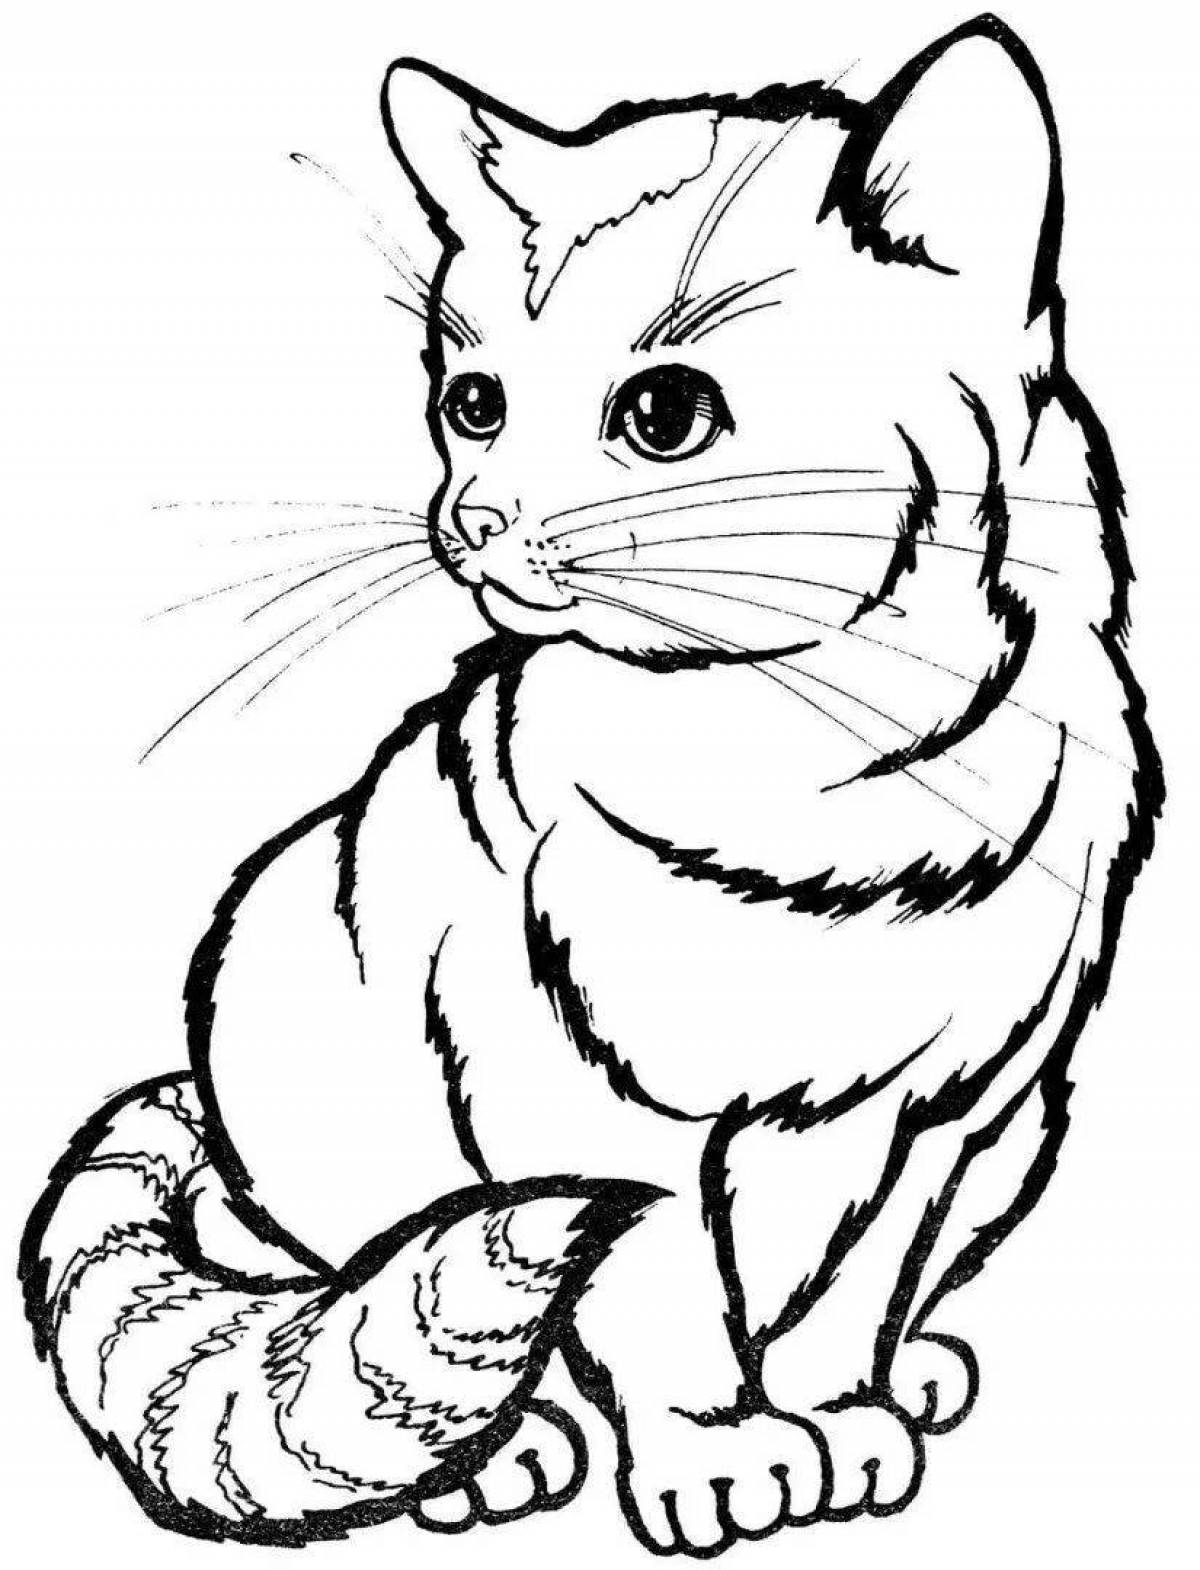 Delightful drawing of a cat